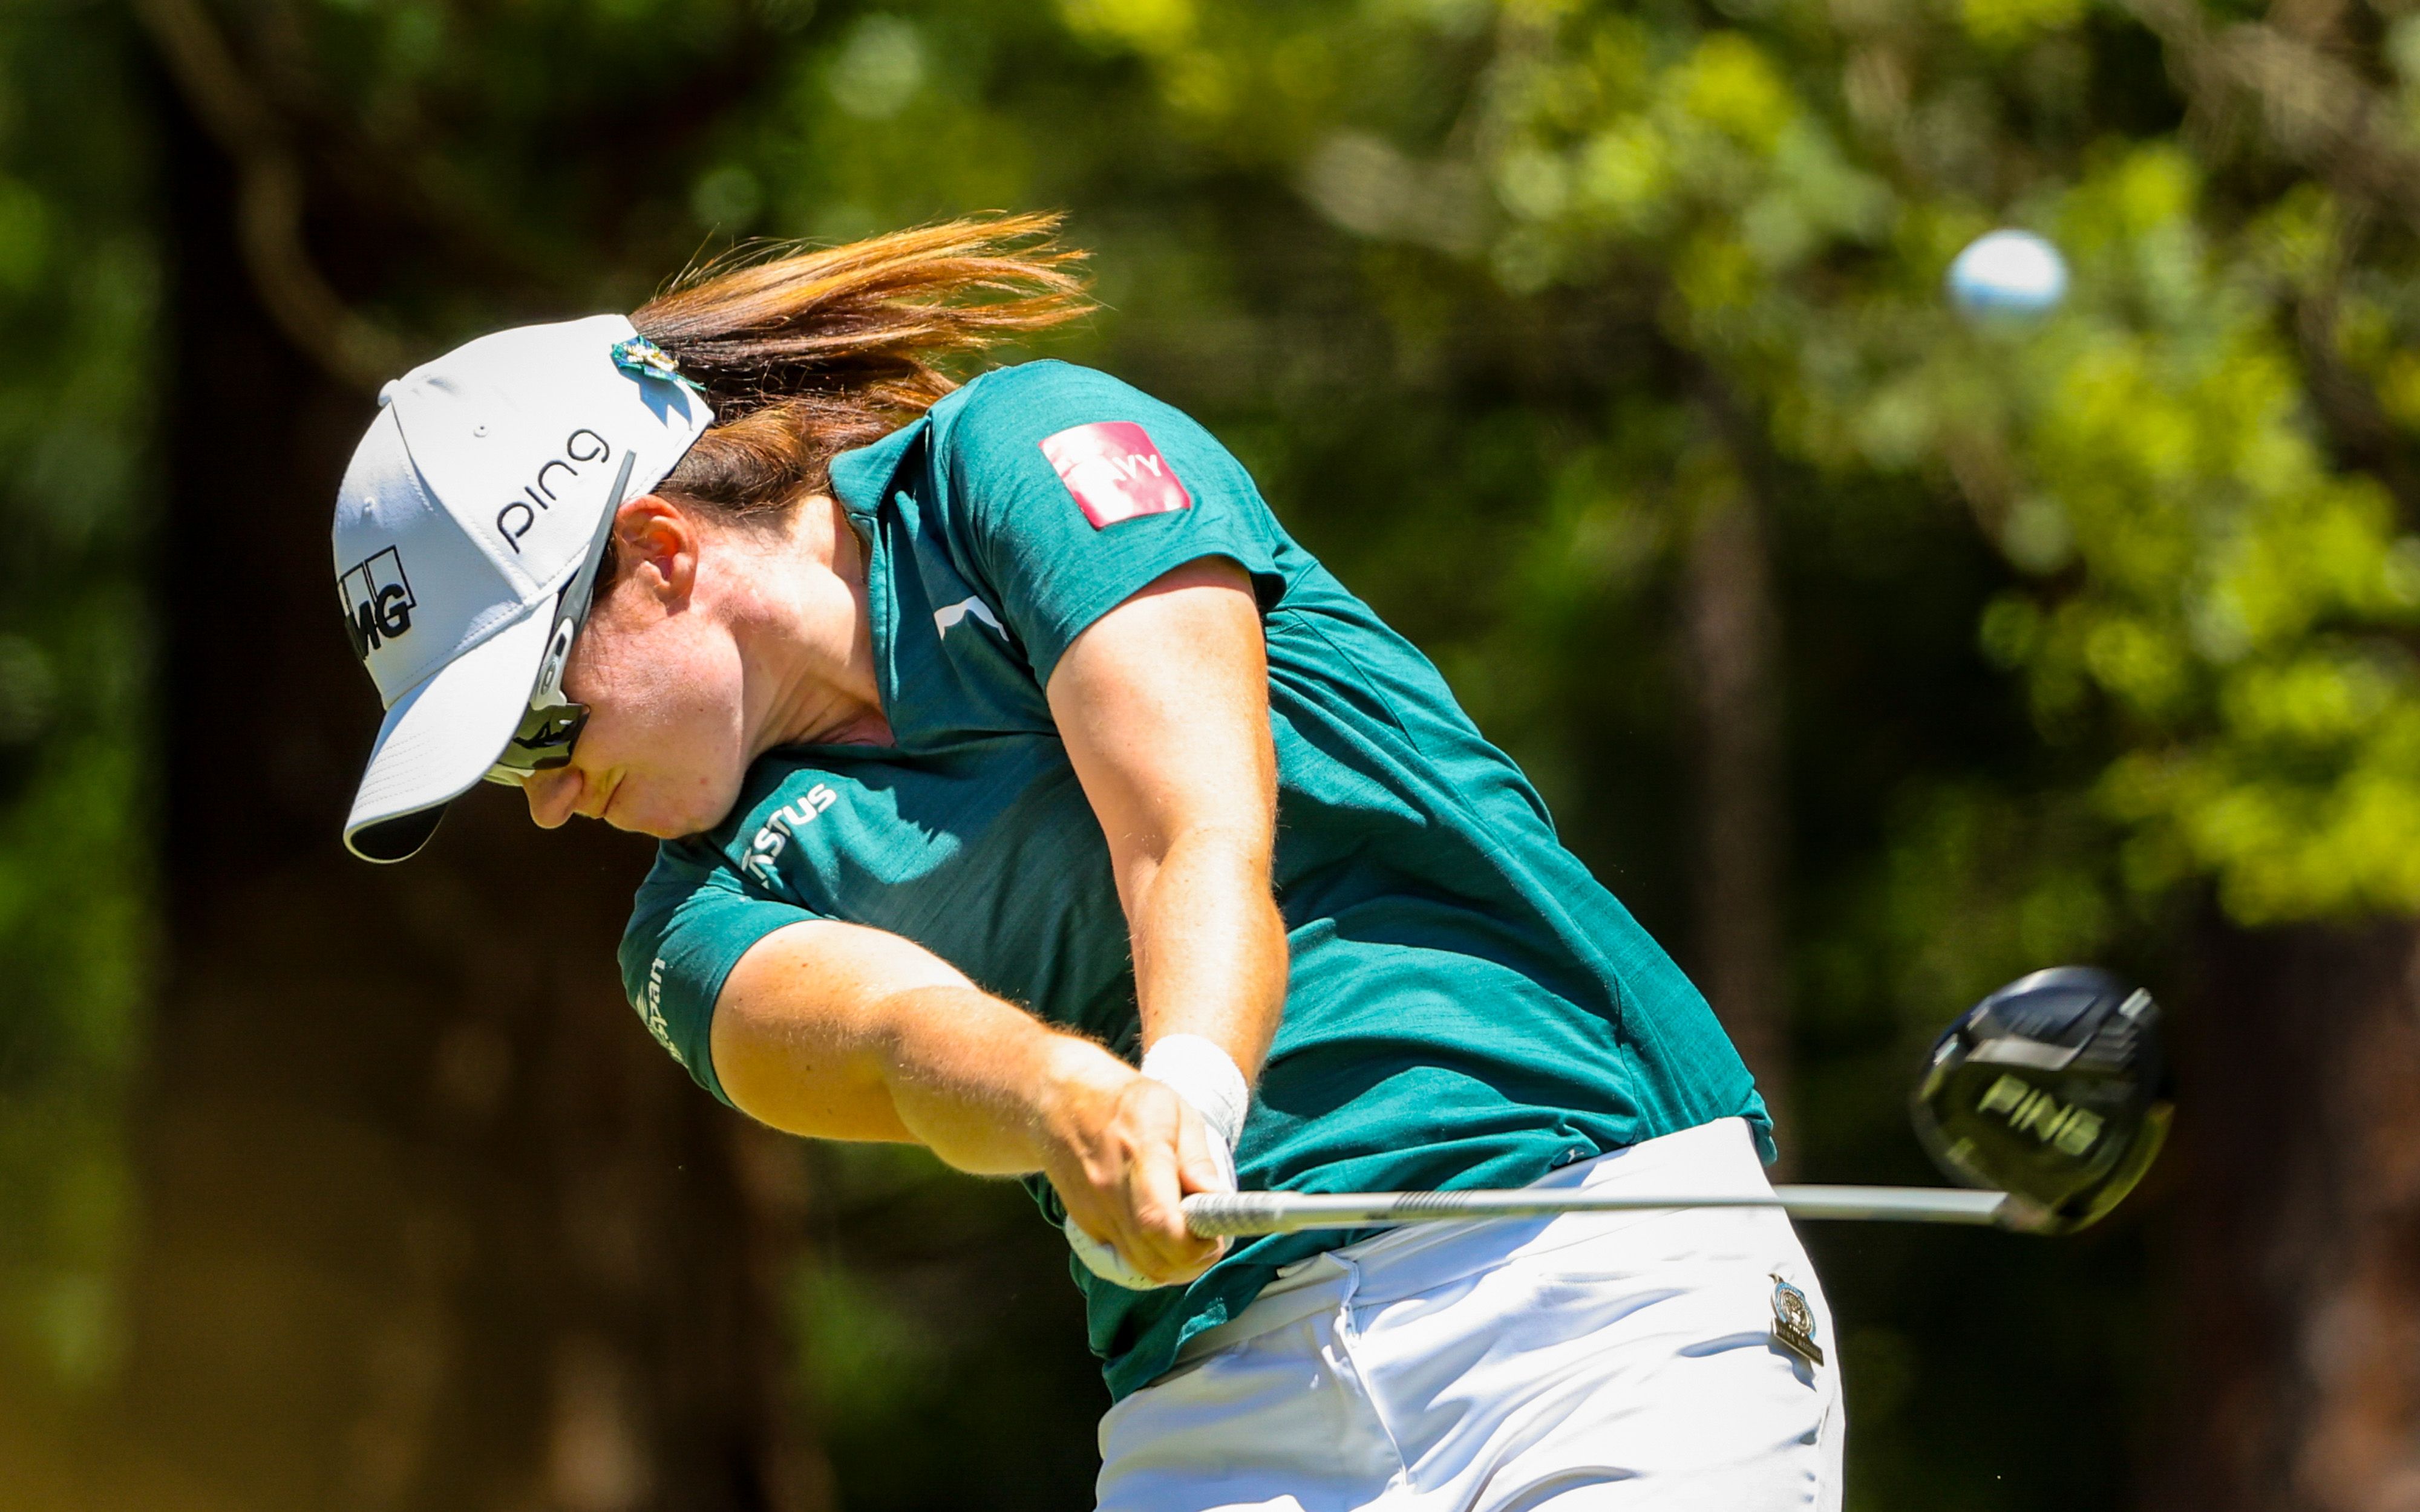 Leona maguire at us open by jeff haynes 1 